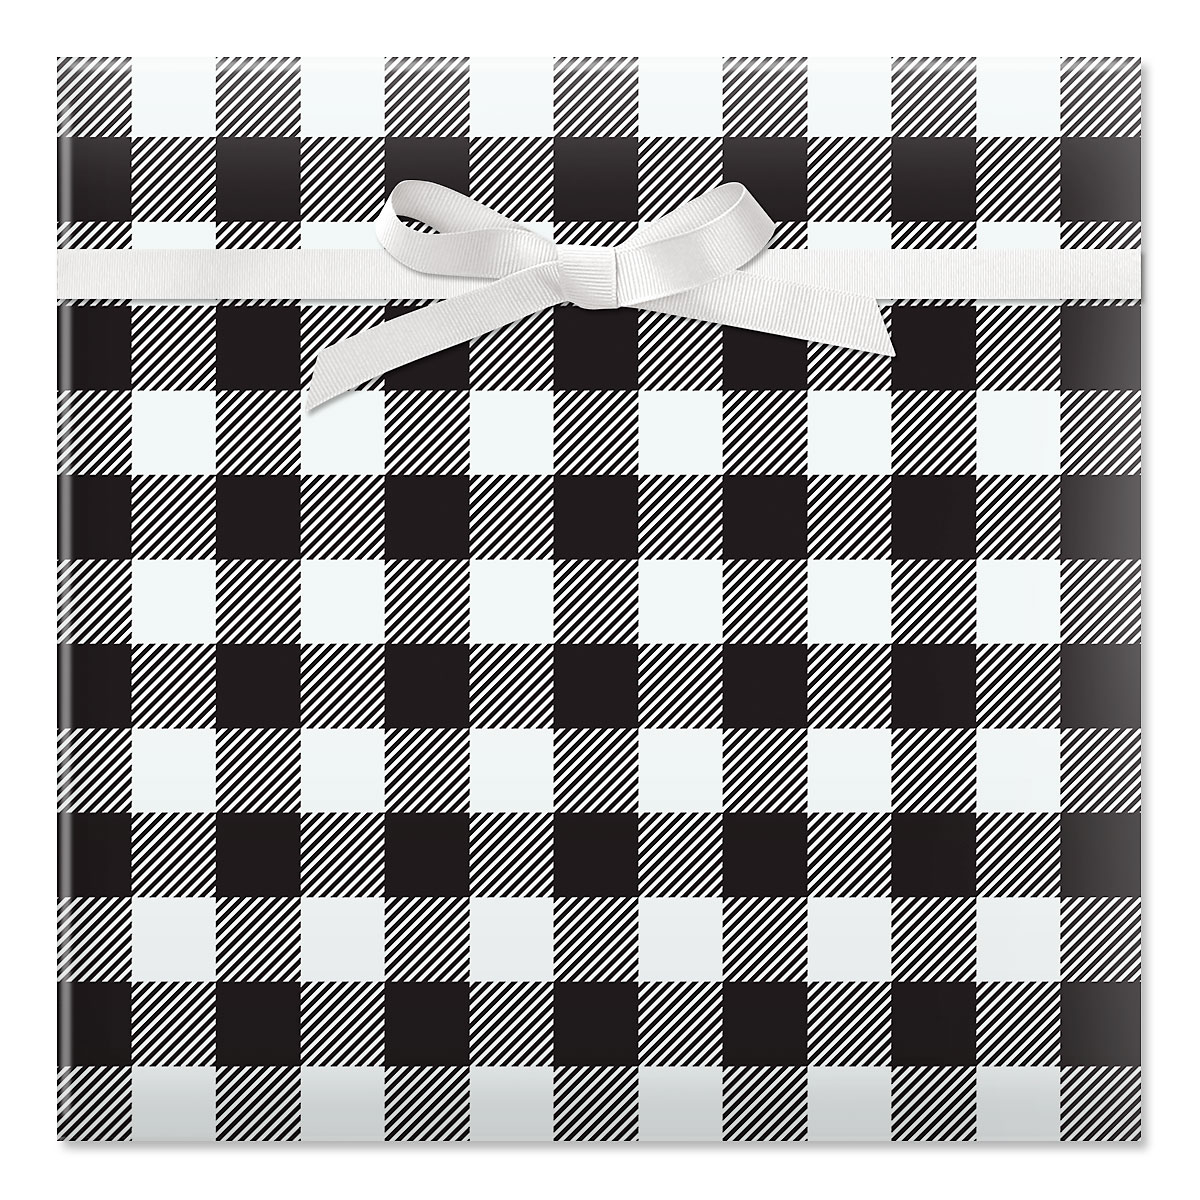 Buffalo Plaid Black Wrapping Paper 24x417' Counter Roll